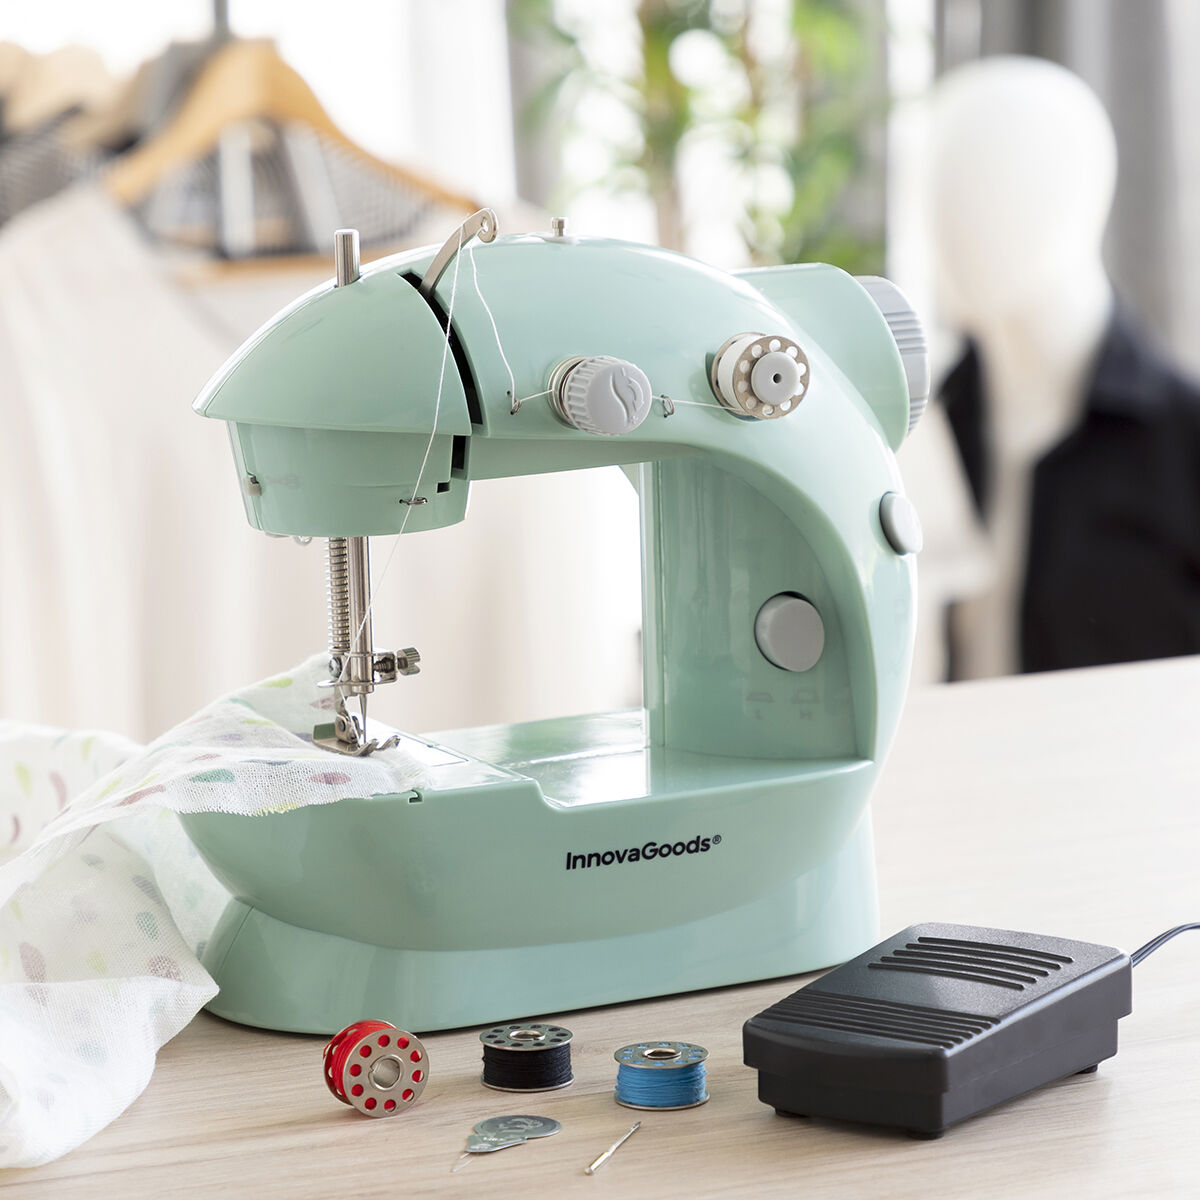 Mini Portable Sewing Machine with LED, Thread Cutter and Accessories Sewny InnovaGoods Modelo Sewny (Refurbished B)